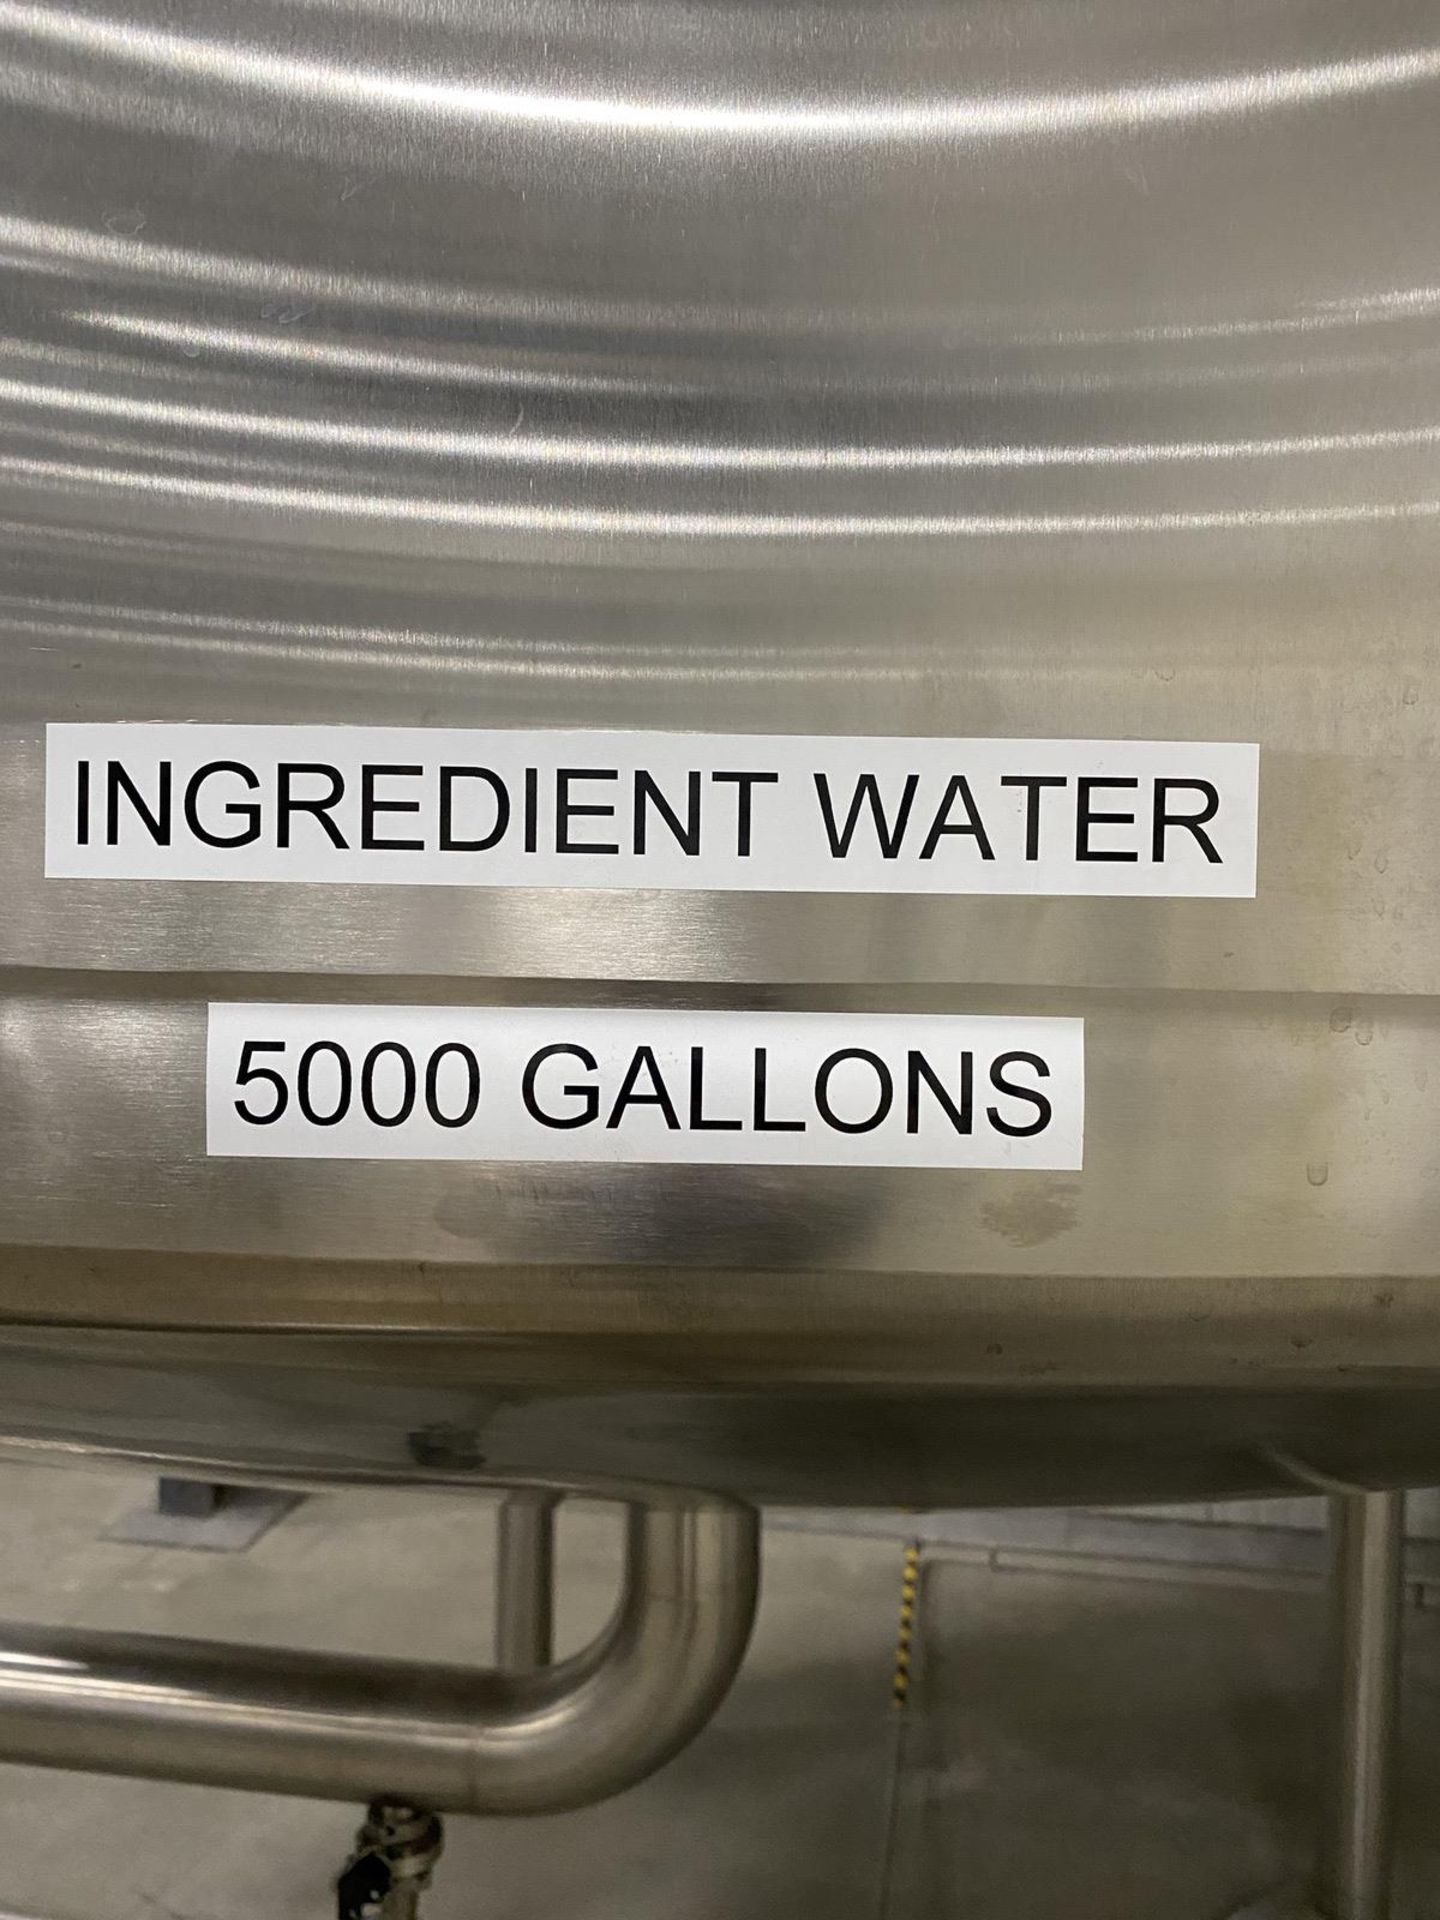 5,000 Gallon Stainless Steel (316L) Ingredient Water Tank on Legs | Rig Fee: $3500 - Image 3 of 6